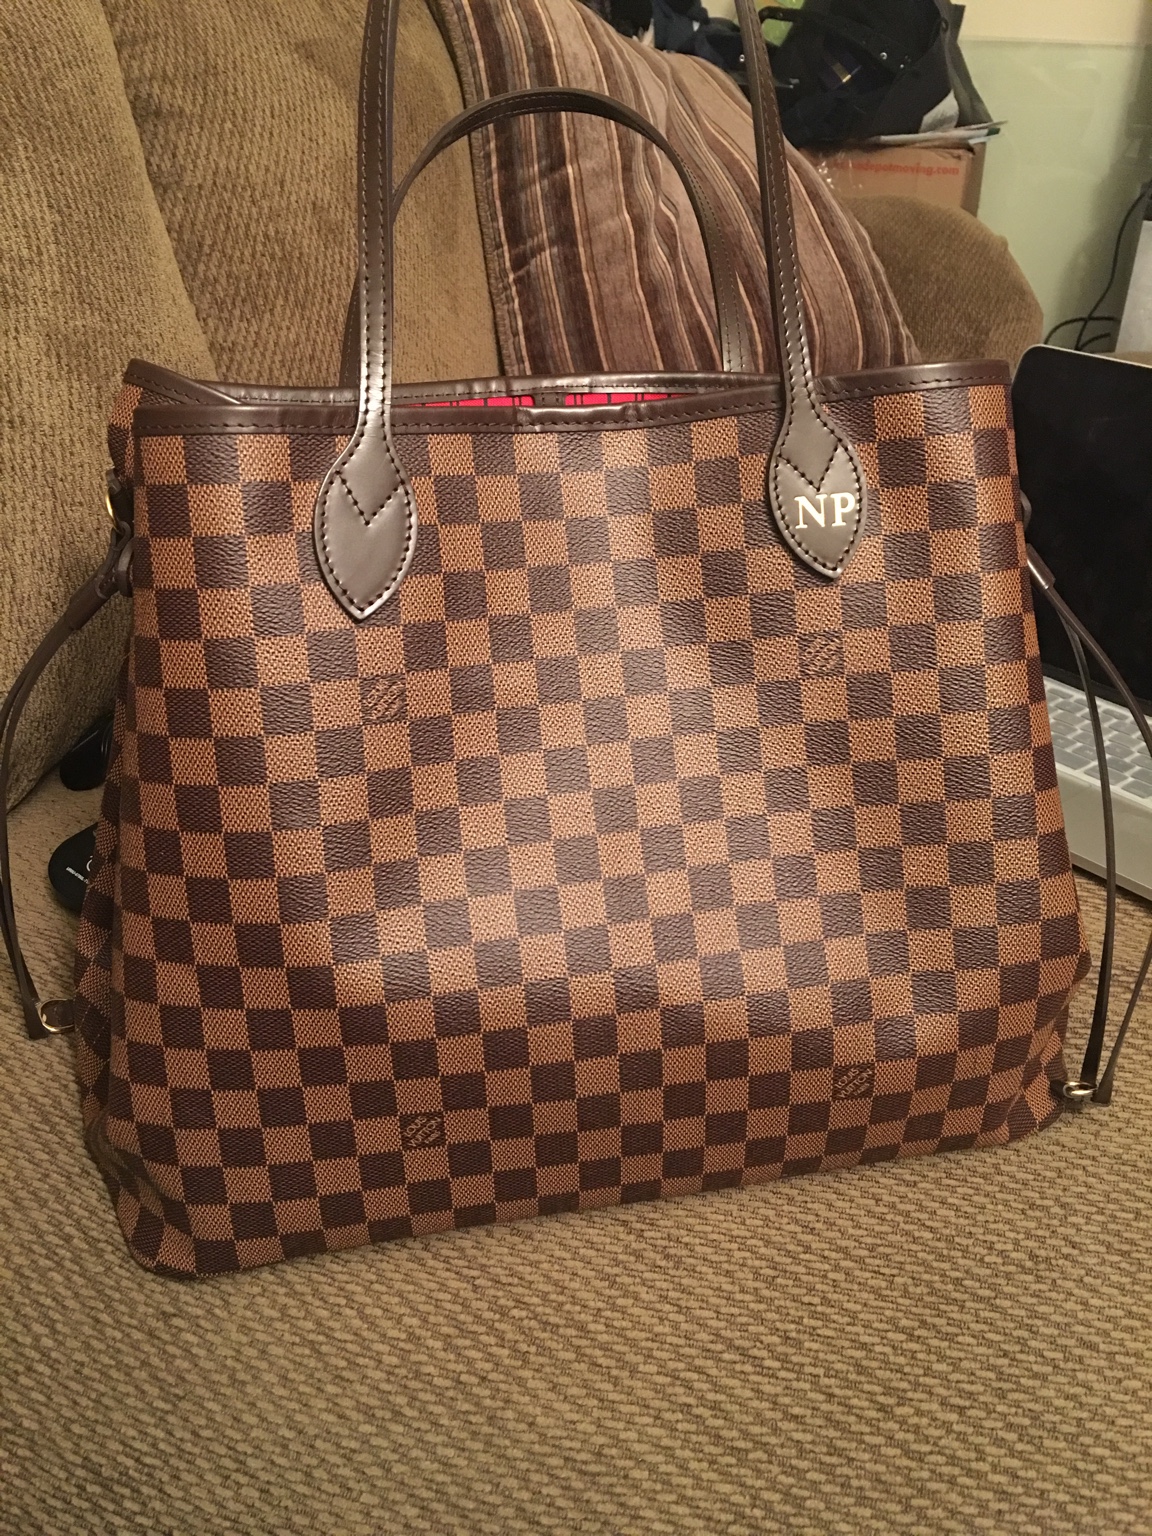 neverfull gm cinched